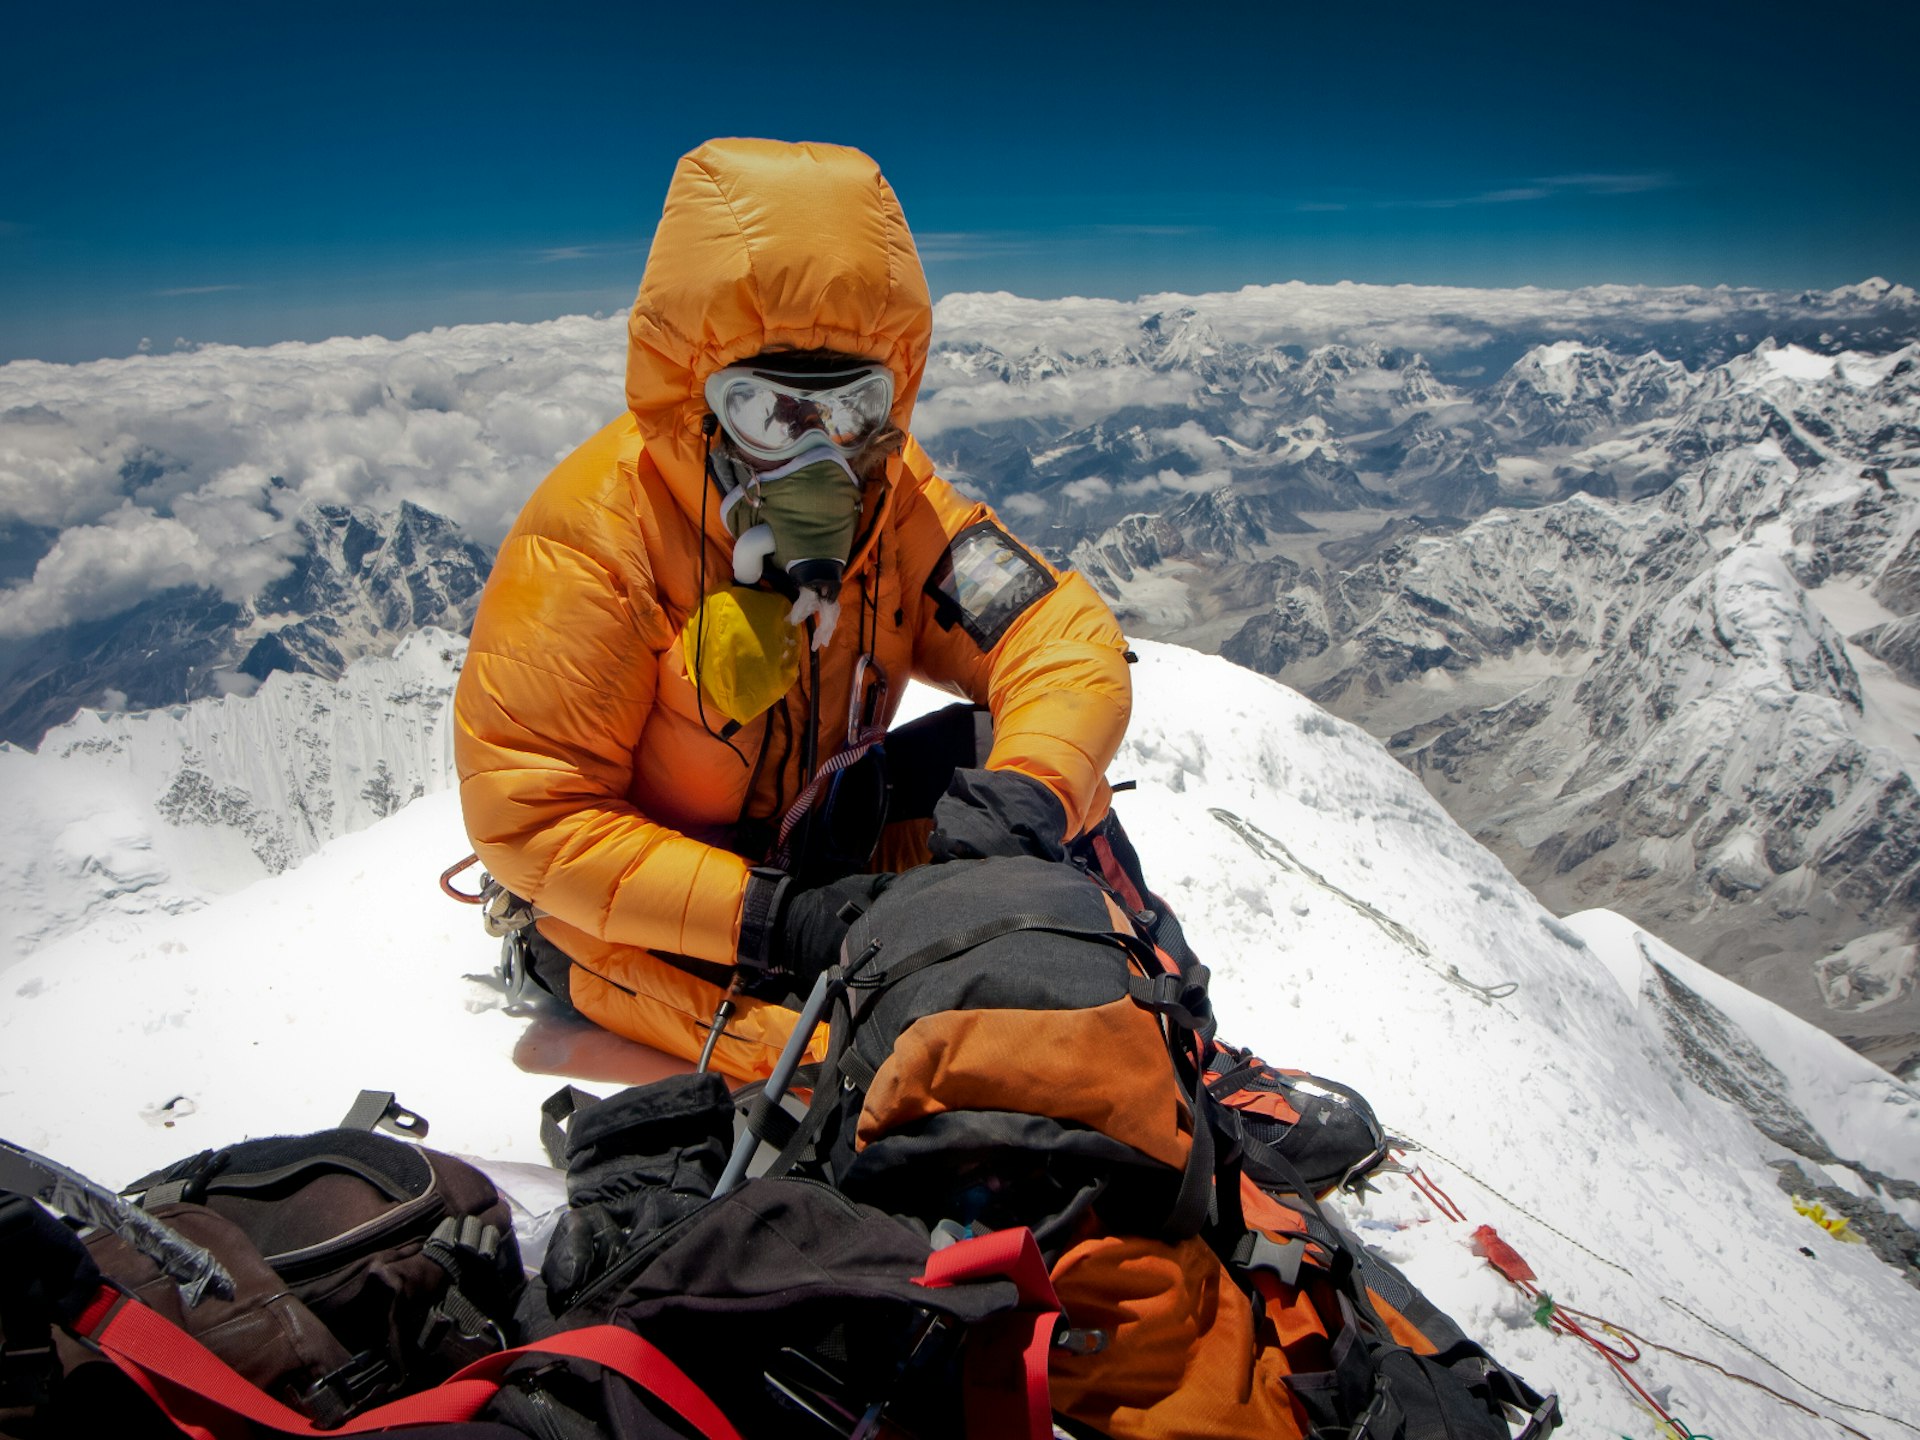 Features - Harry Kikstra on the summit of Mount Everest wearing oxygen mask